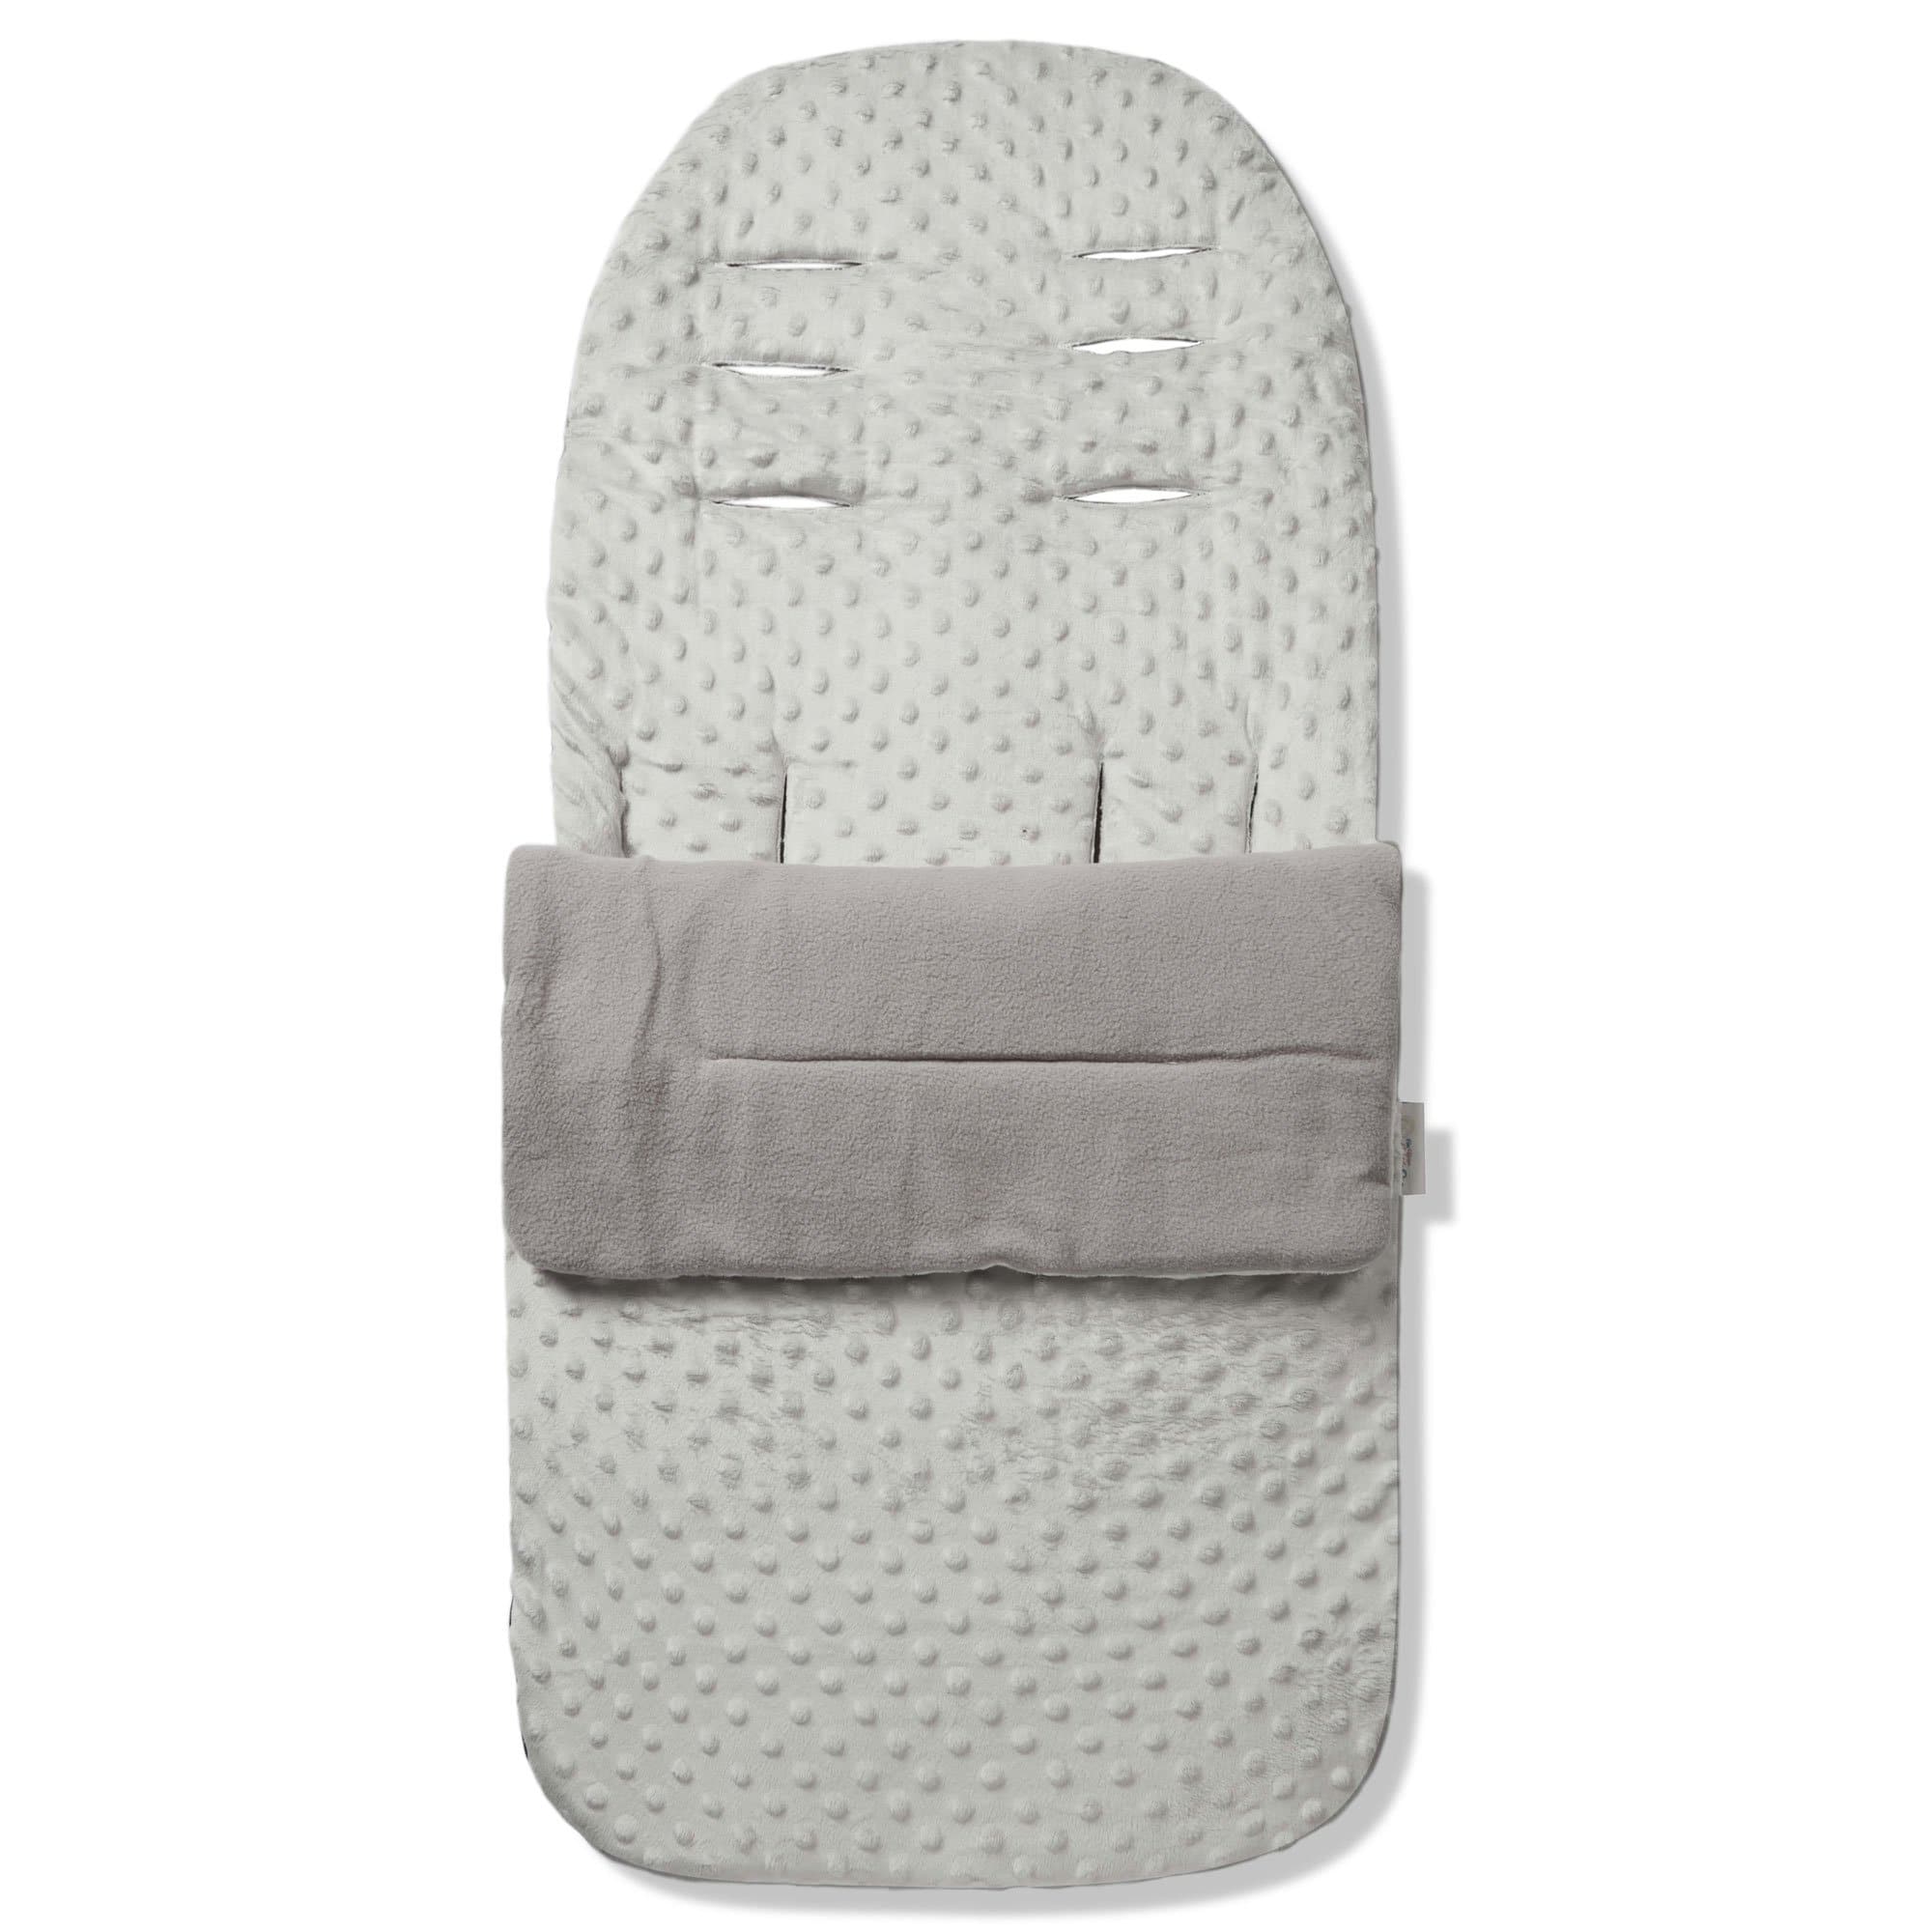 Dimple Footmuff / Cosy Toes Compatible with Zeta - Grey / Fits All Models | For Your Little One